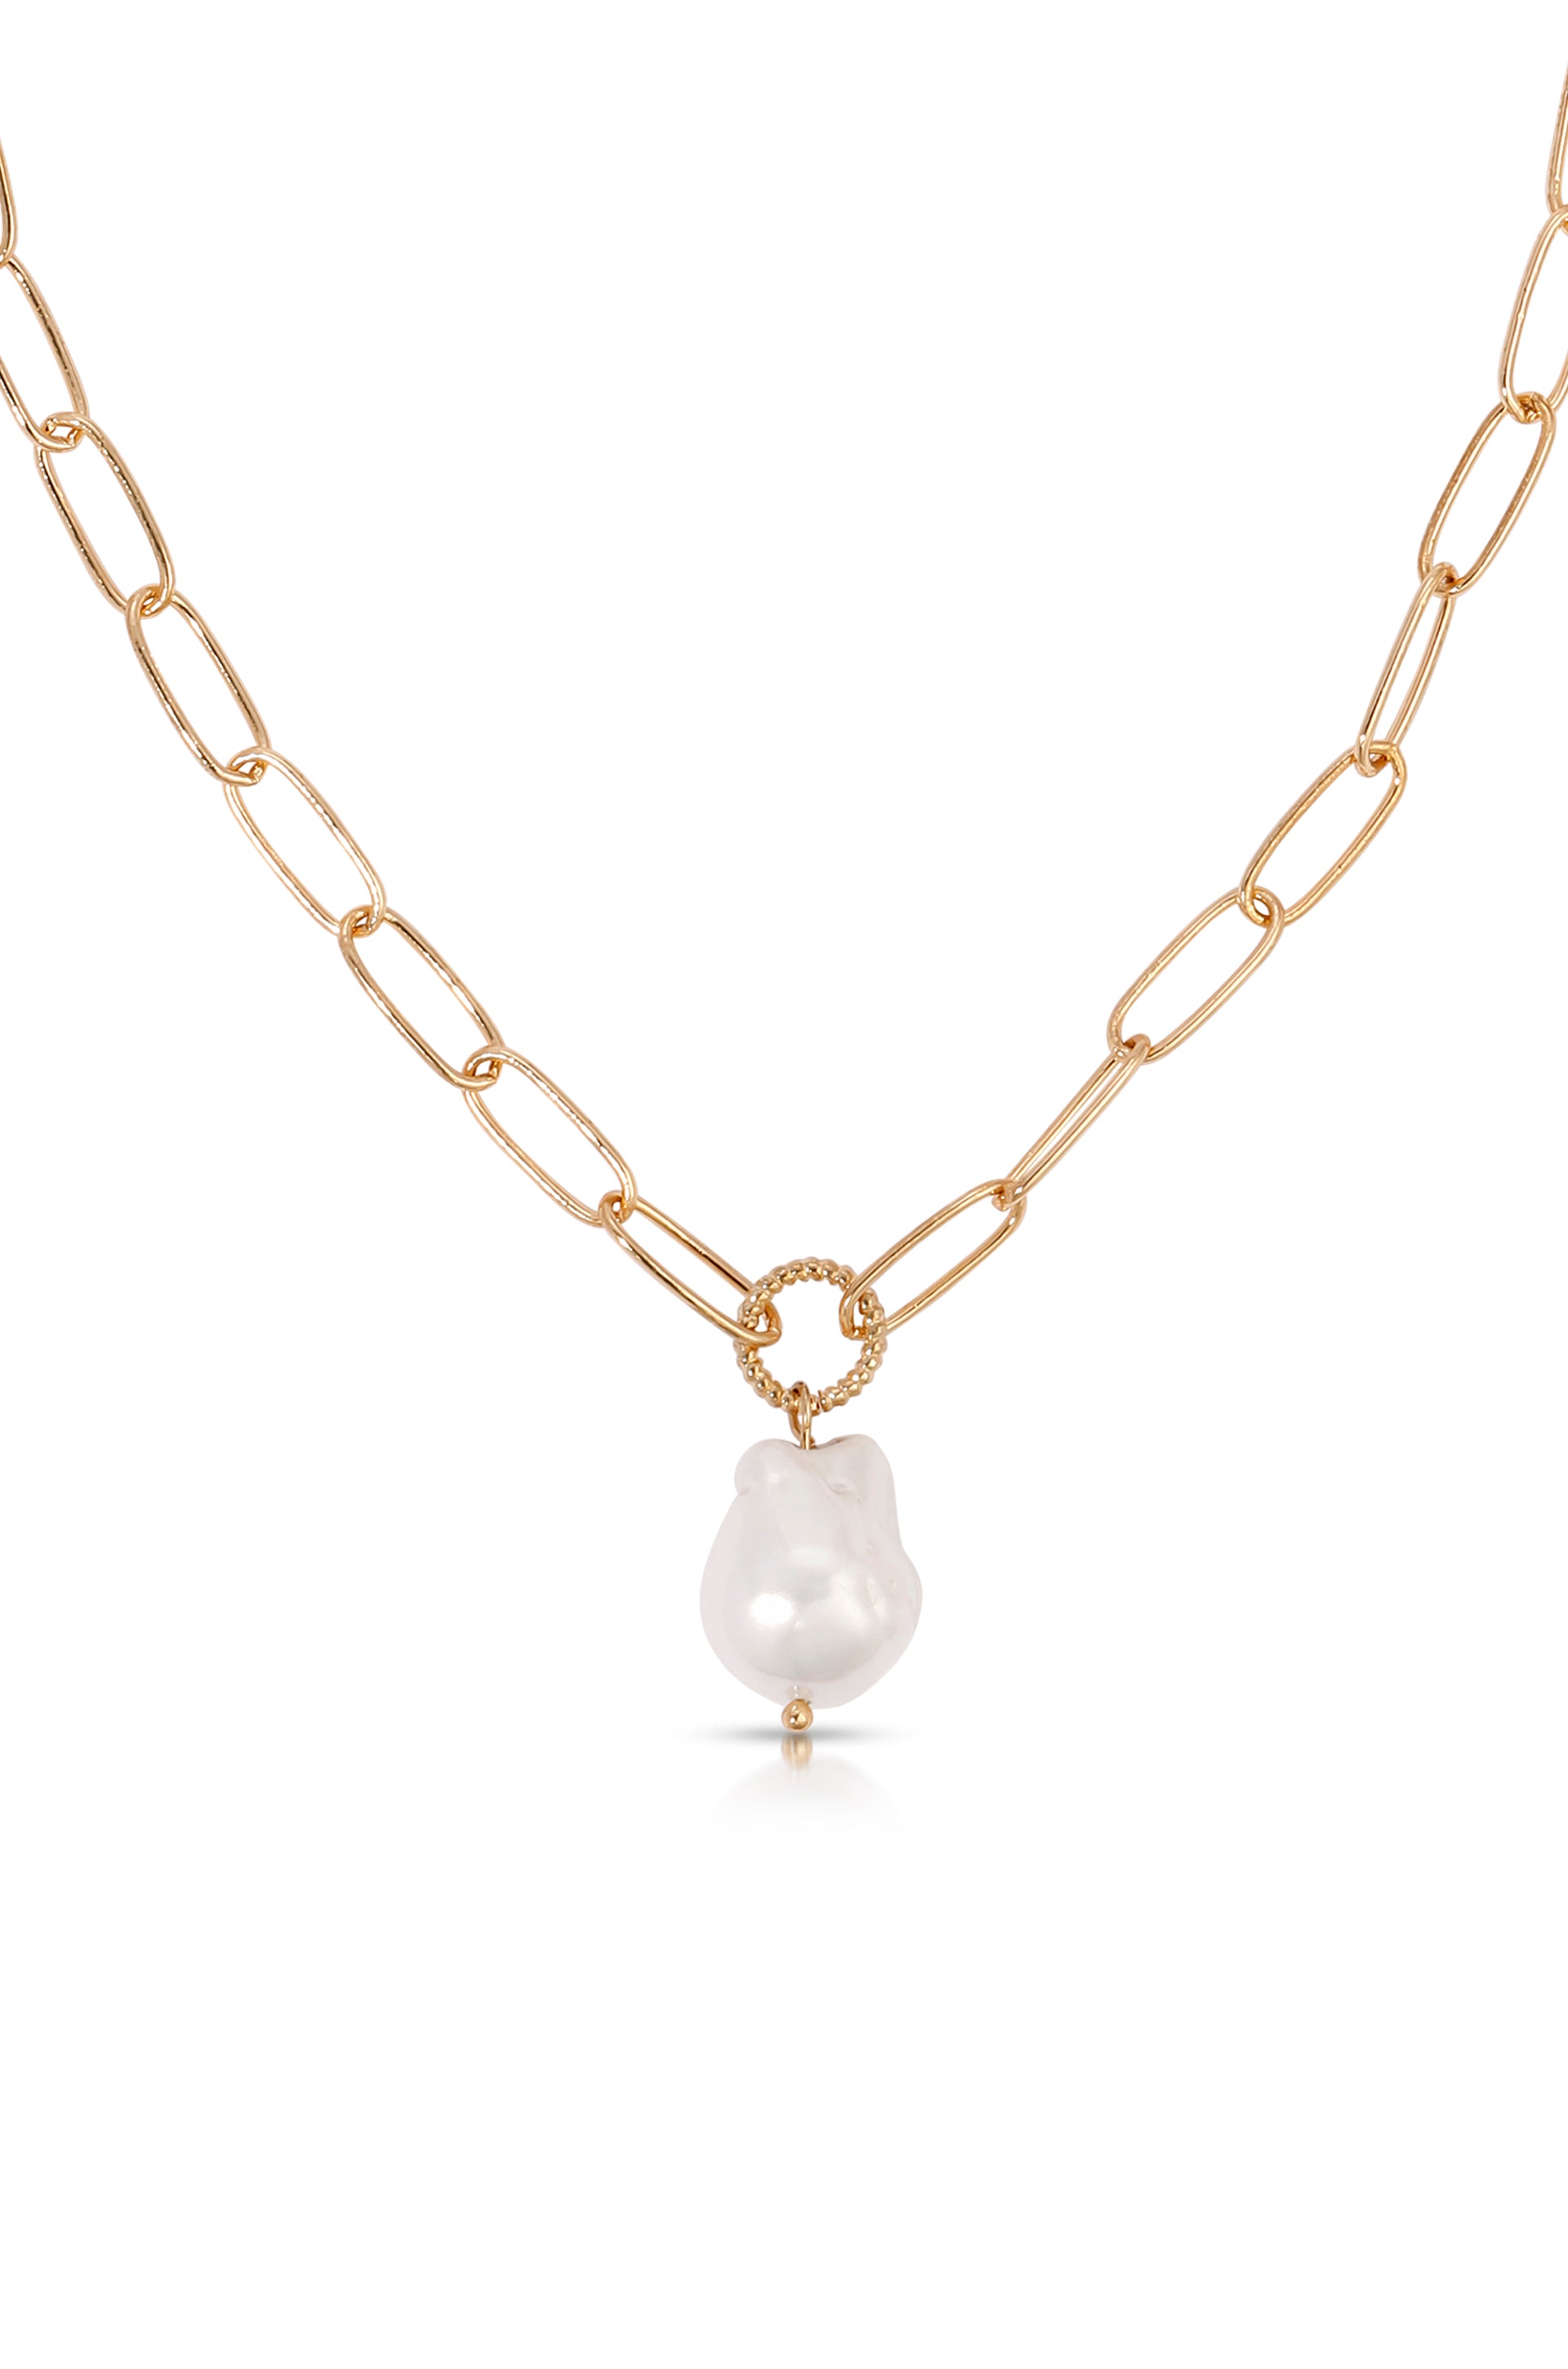 Single Pearl Open Links Chain Necklace in white pearl close up